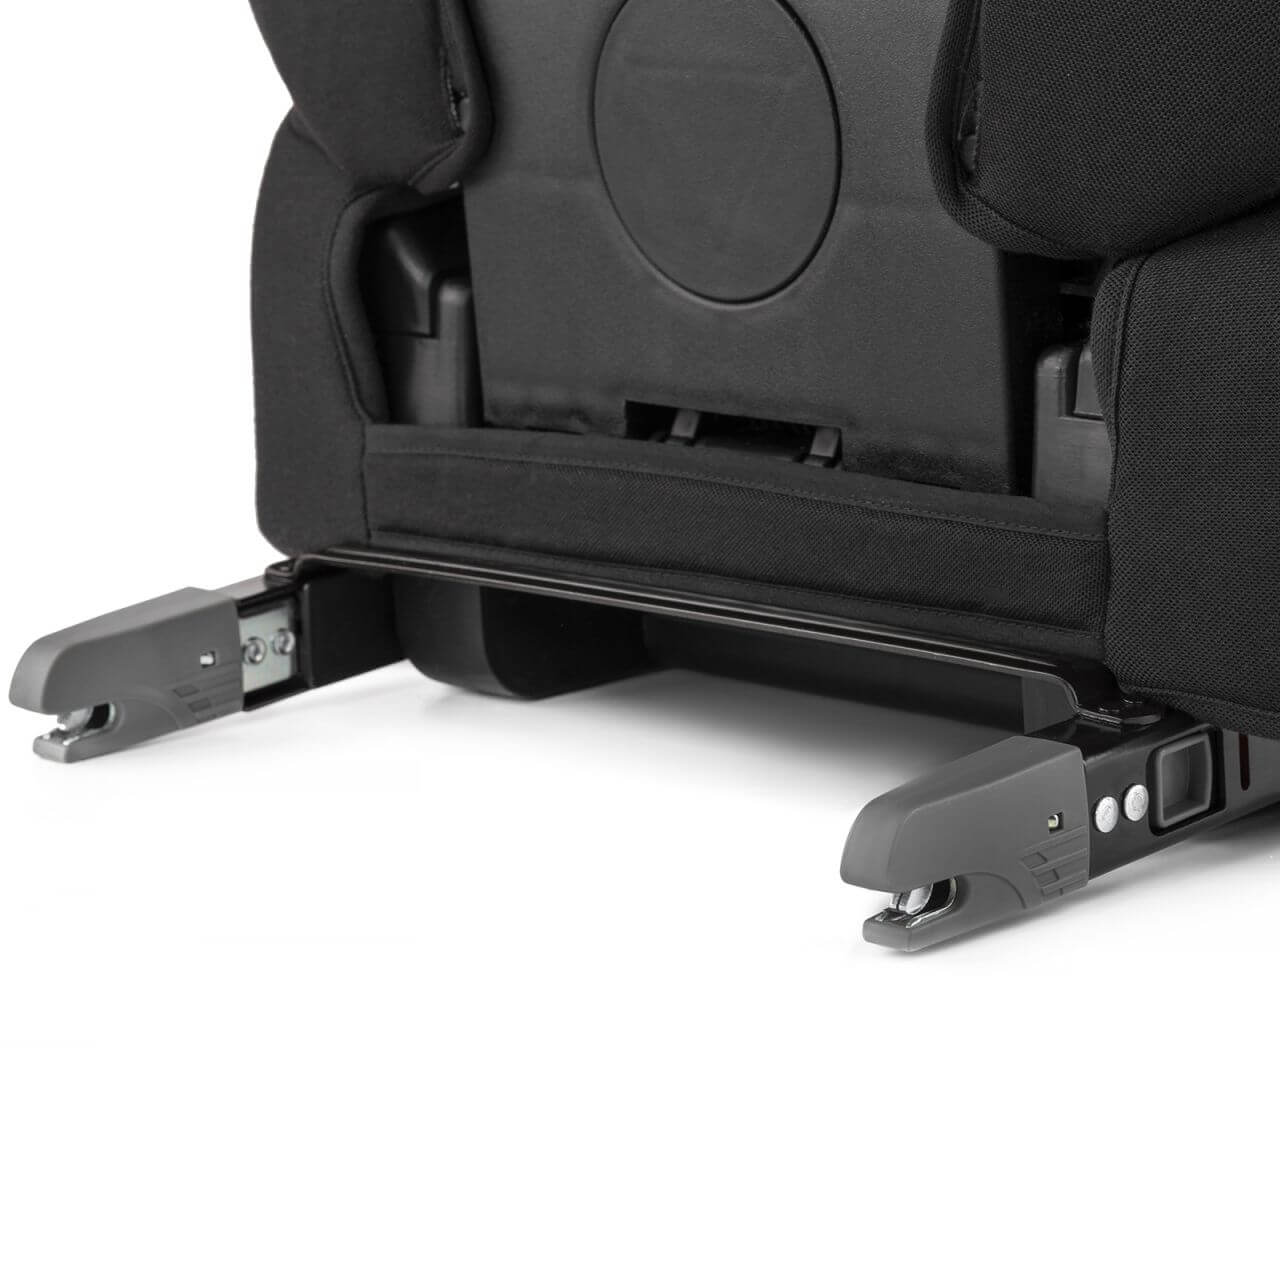 Isofix fitting for easy tethering